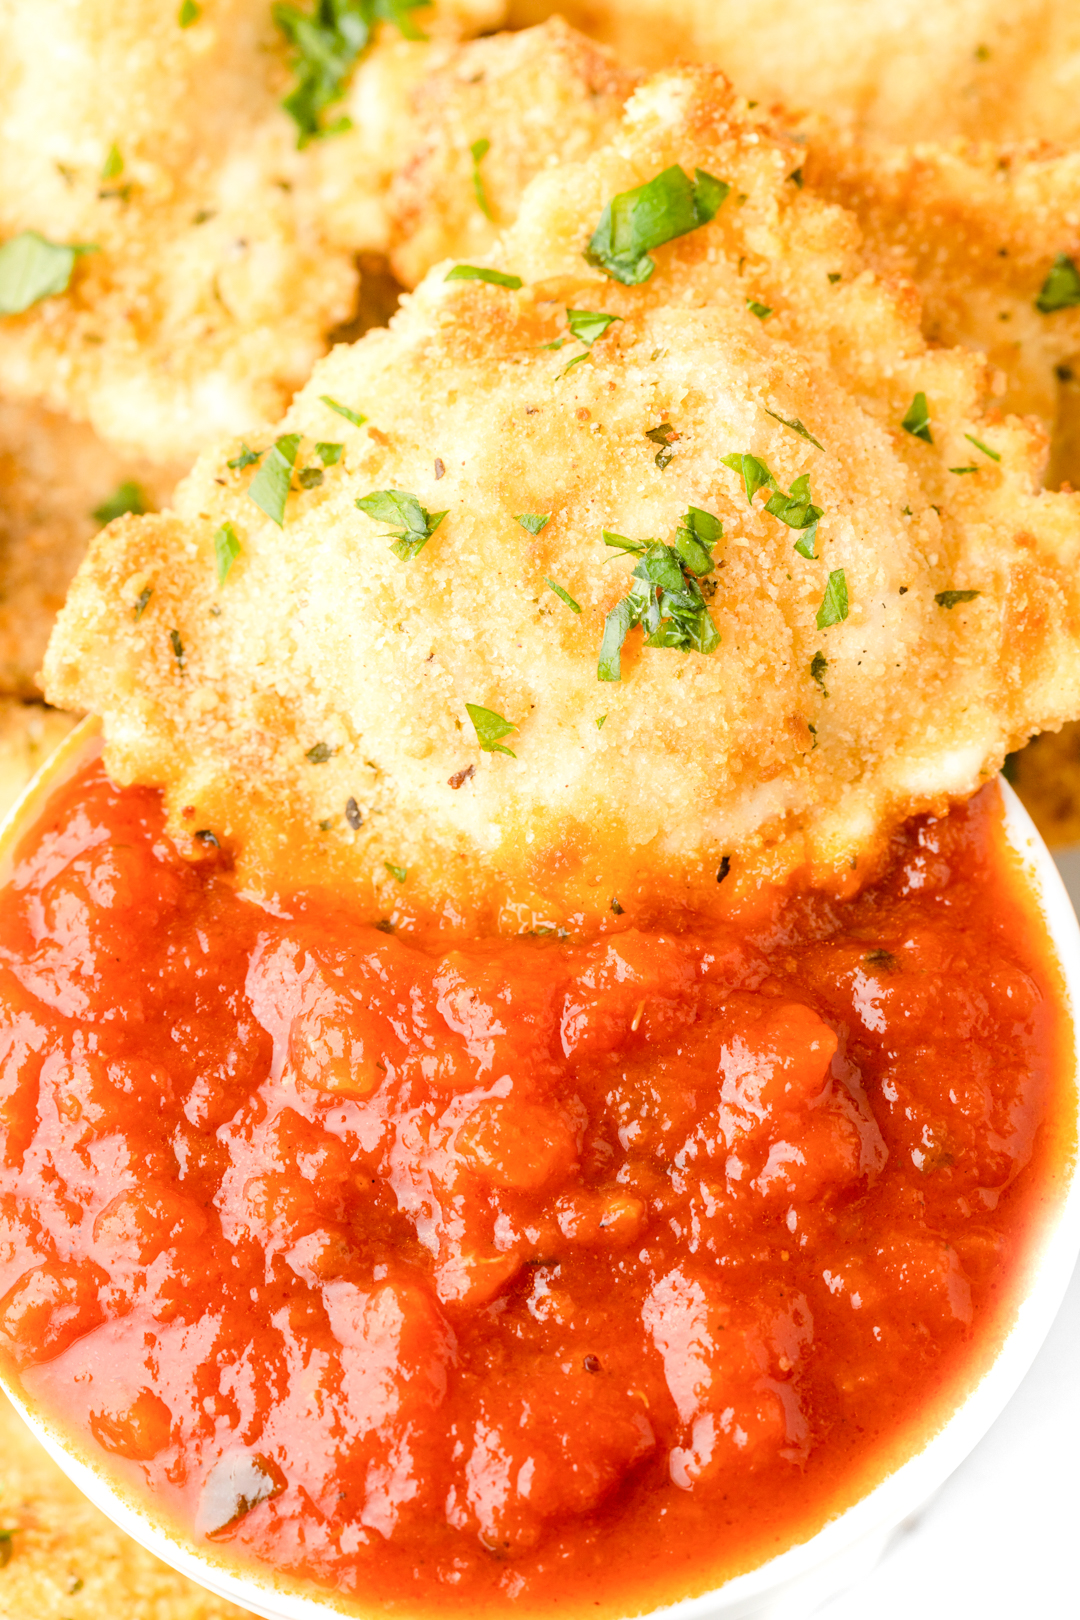 up close air fried ravioli being dipped into spaghetti sauce